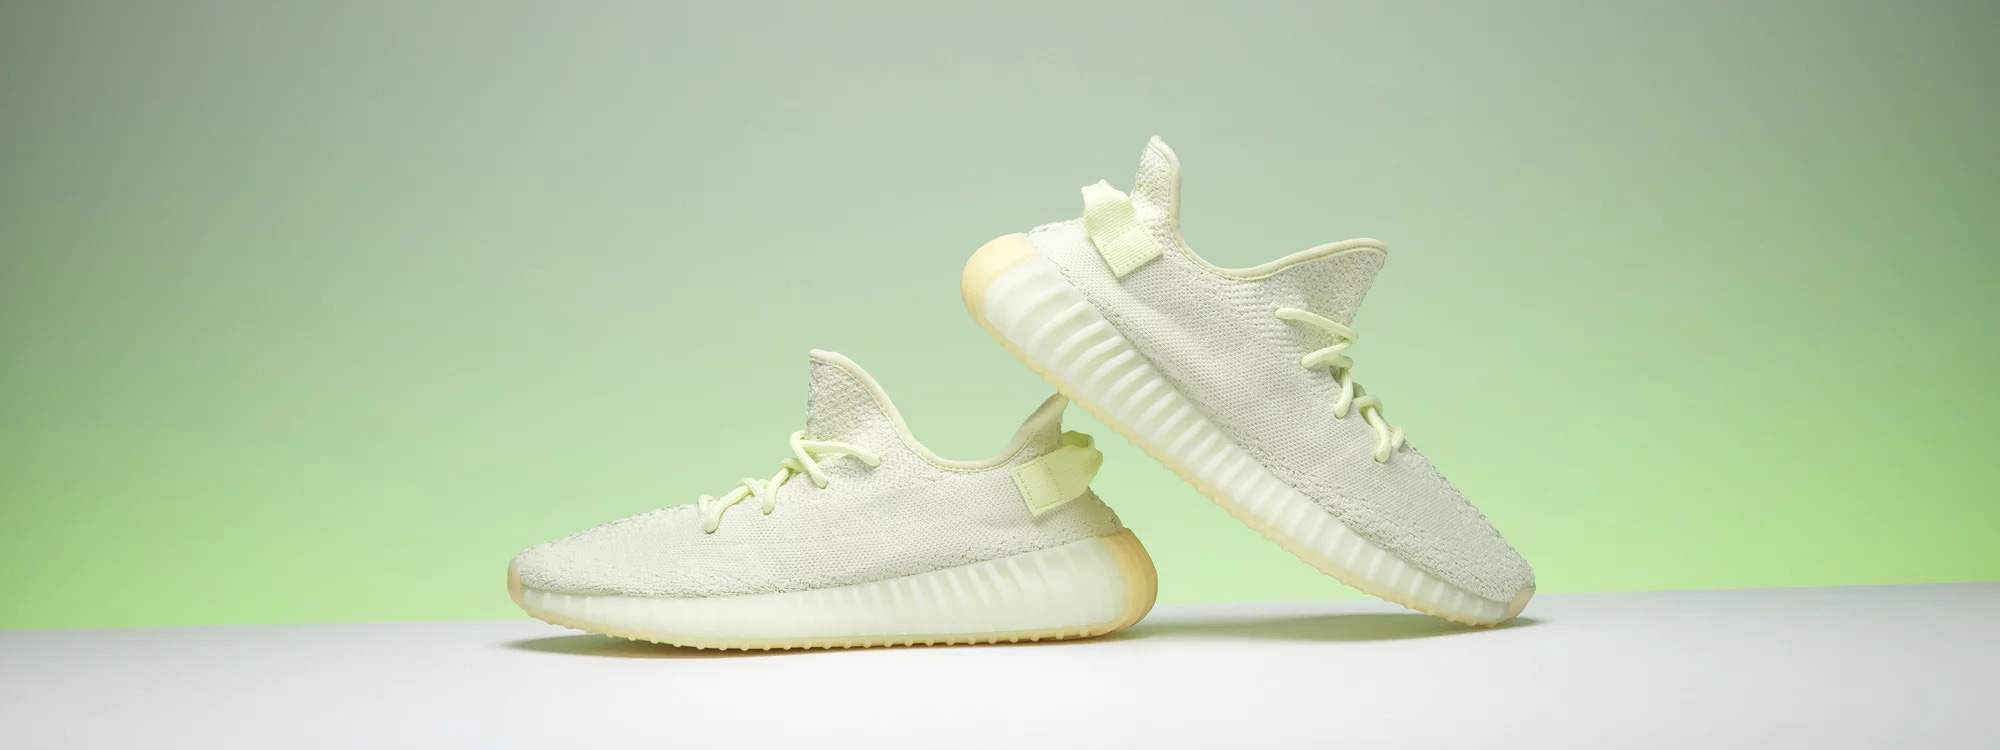 Order Cheap Adidas Yeezy Boost 350 V2 Butter sneakers